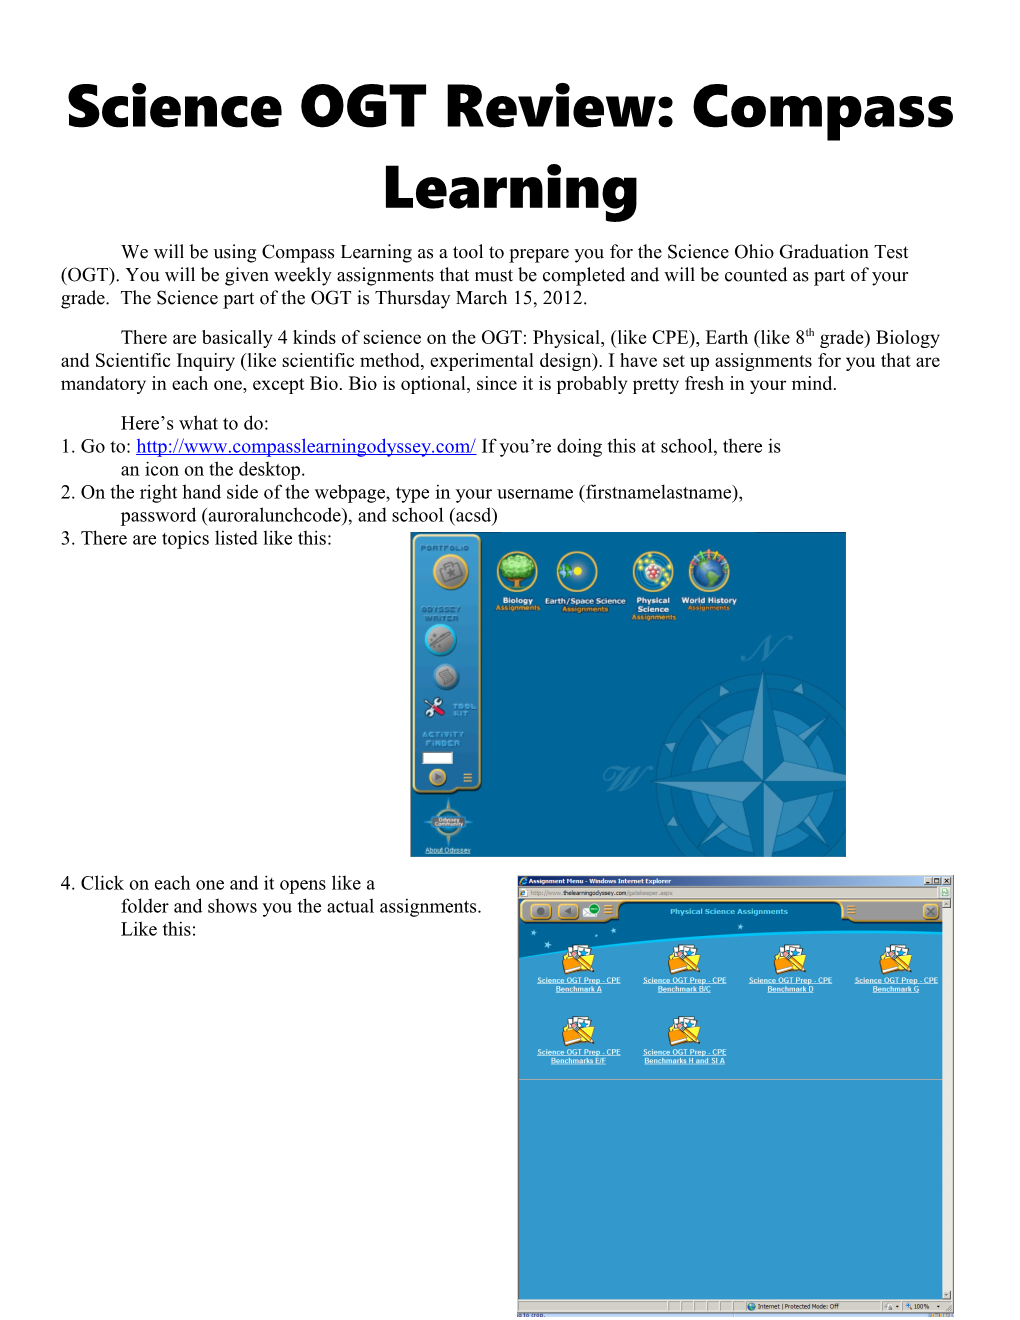 Science OGT Review: Compass Learning